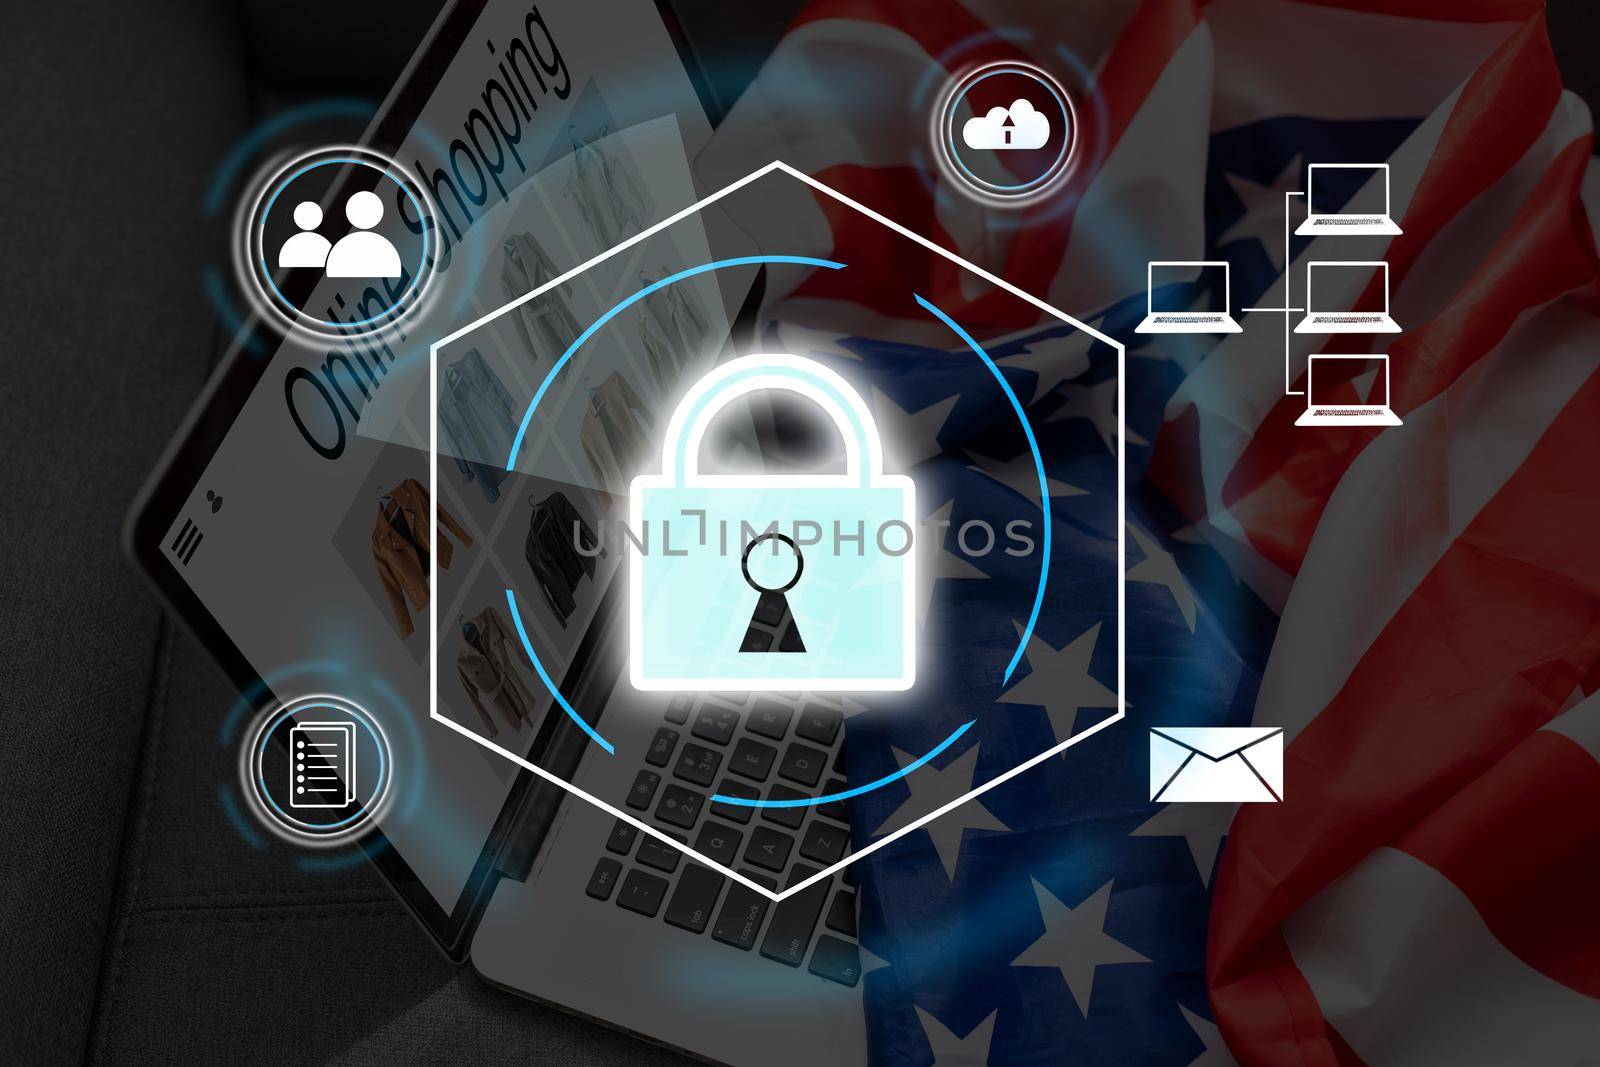 Digital padlock icon, cyber security network and data protection technology on virtual interface screen. Online internet authorized access against cyber attack.and business data privacy concept